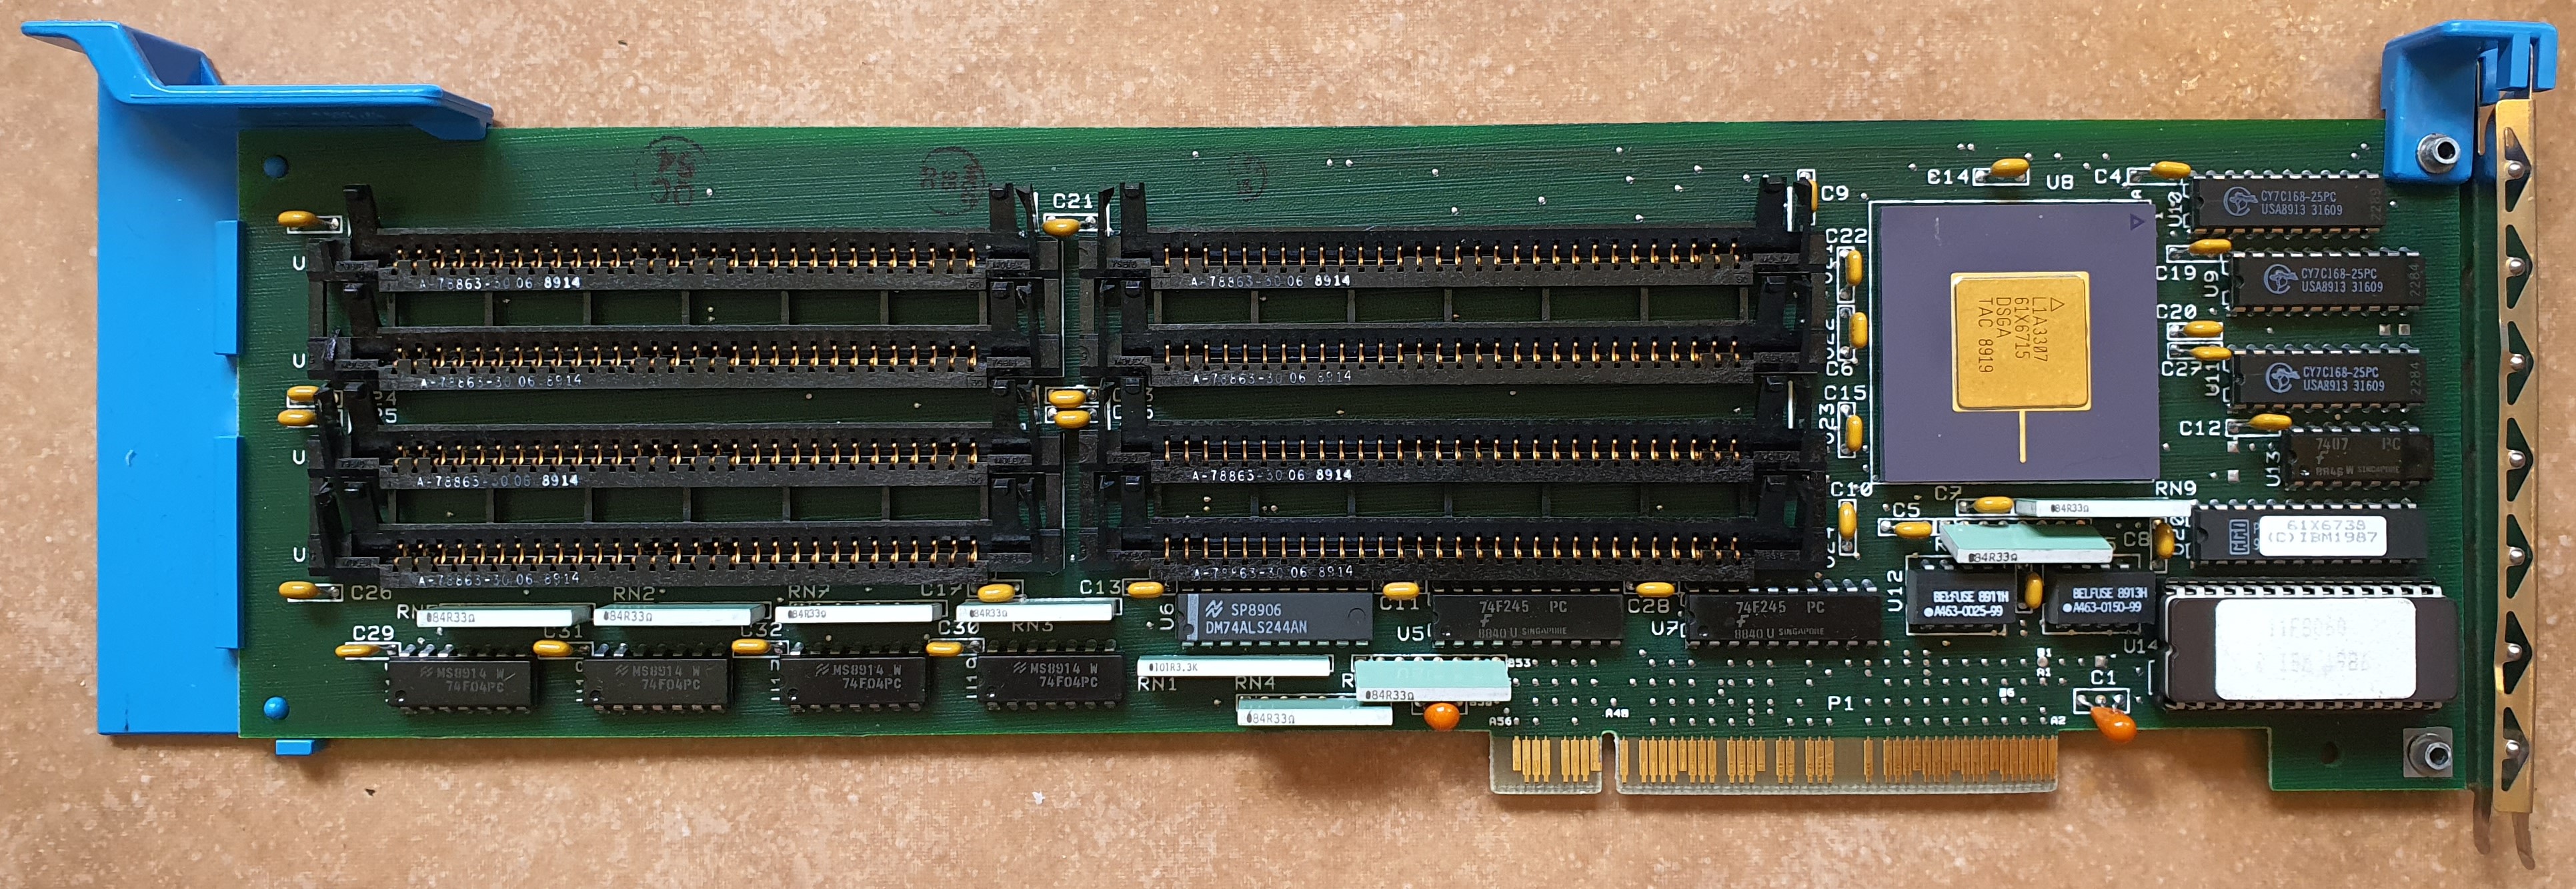 IBM Memory Expansion Adapters